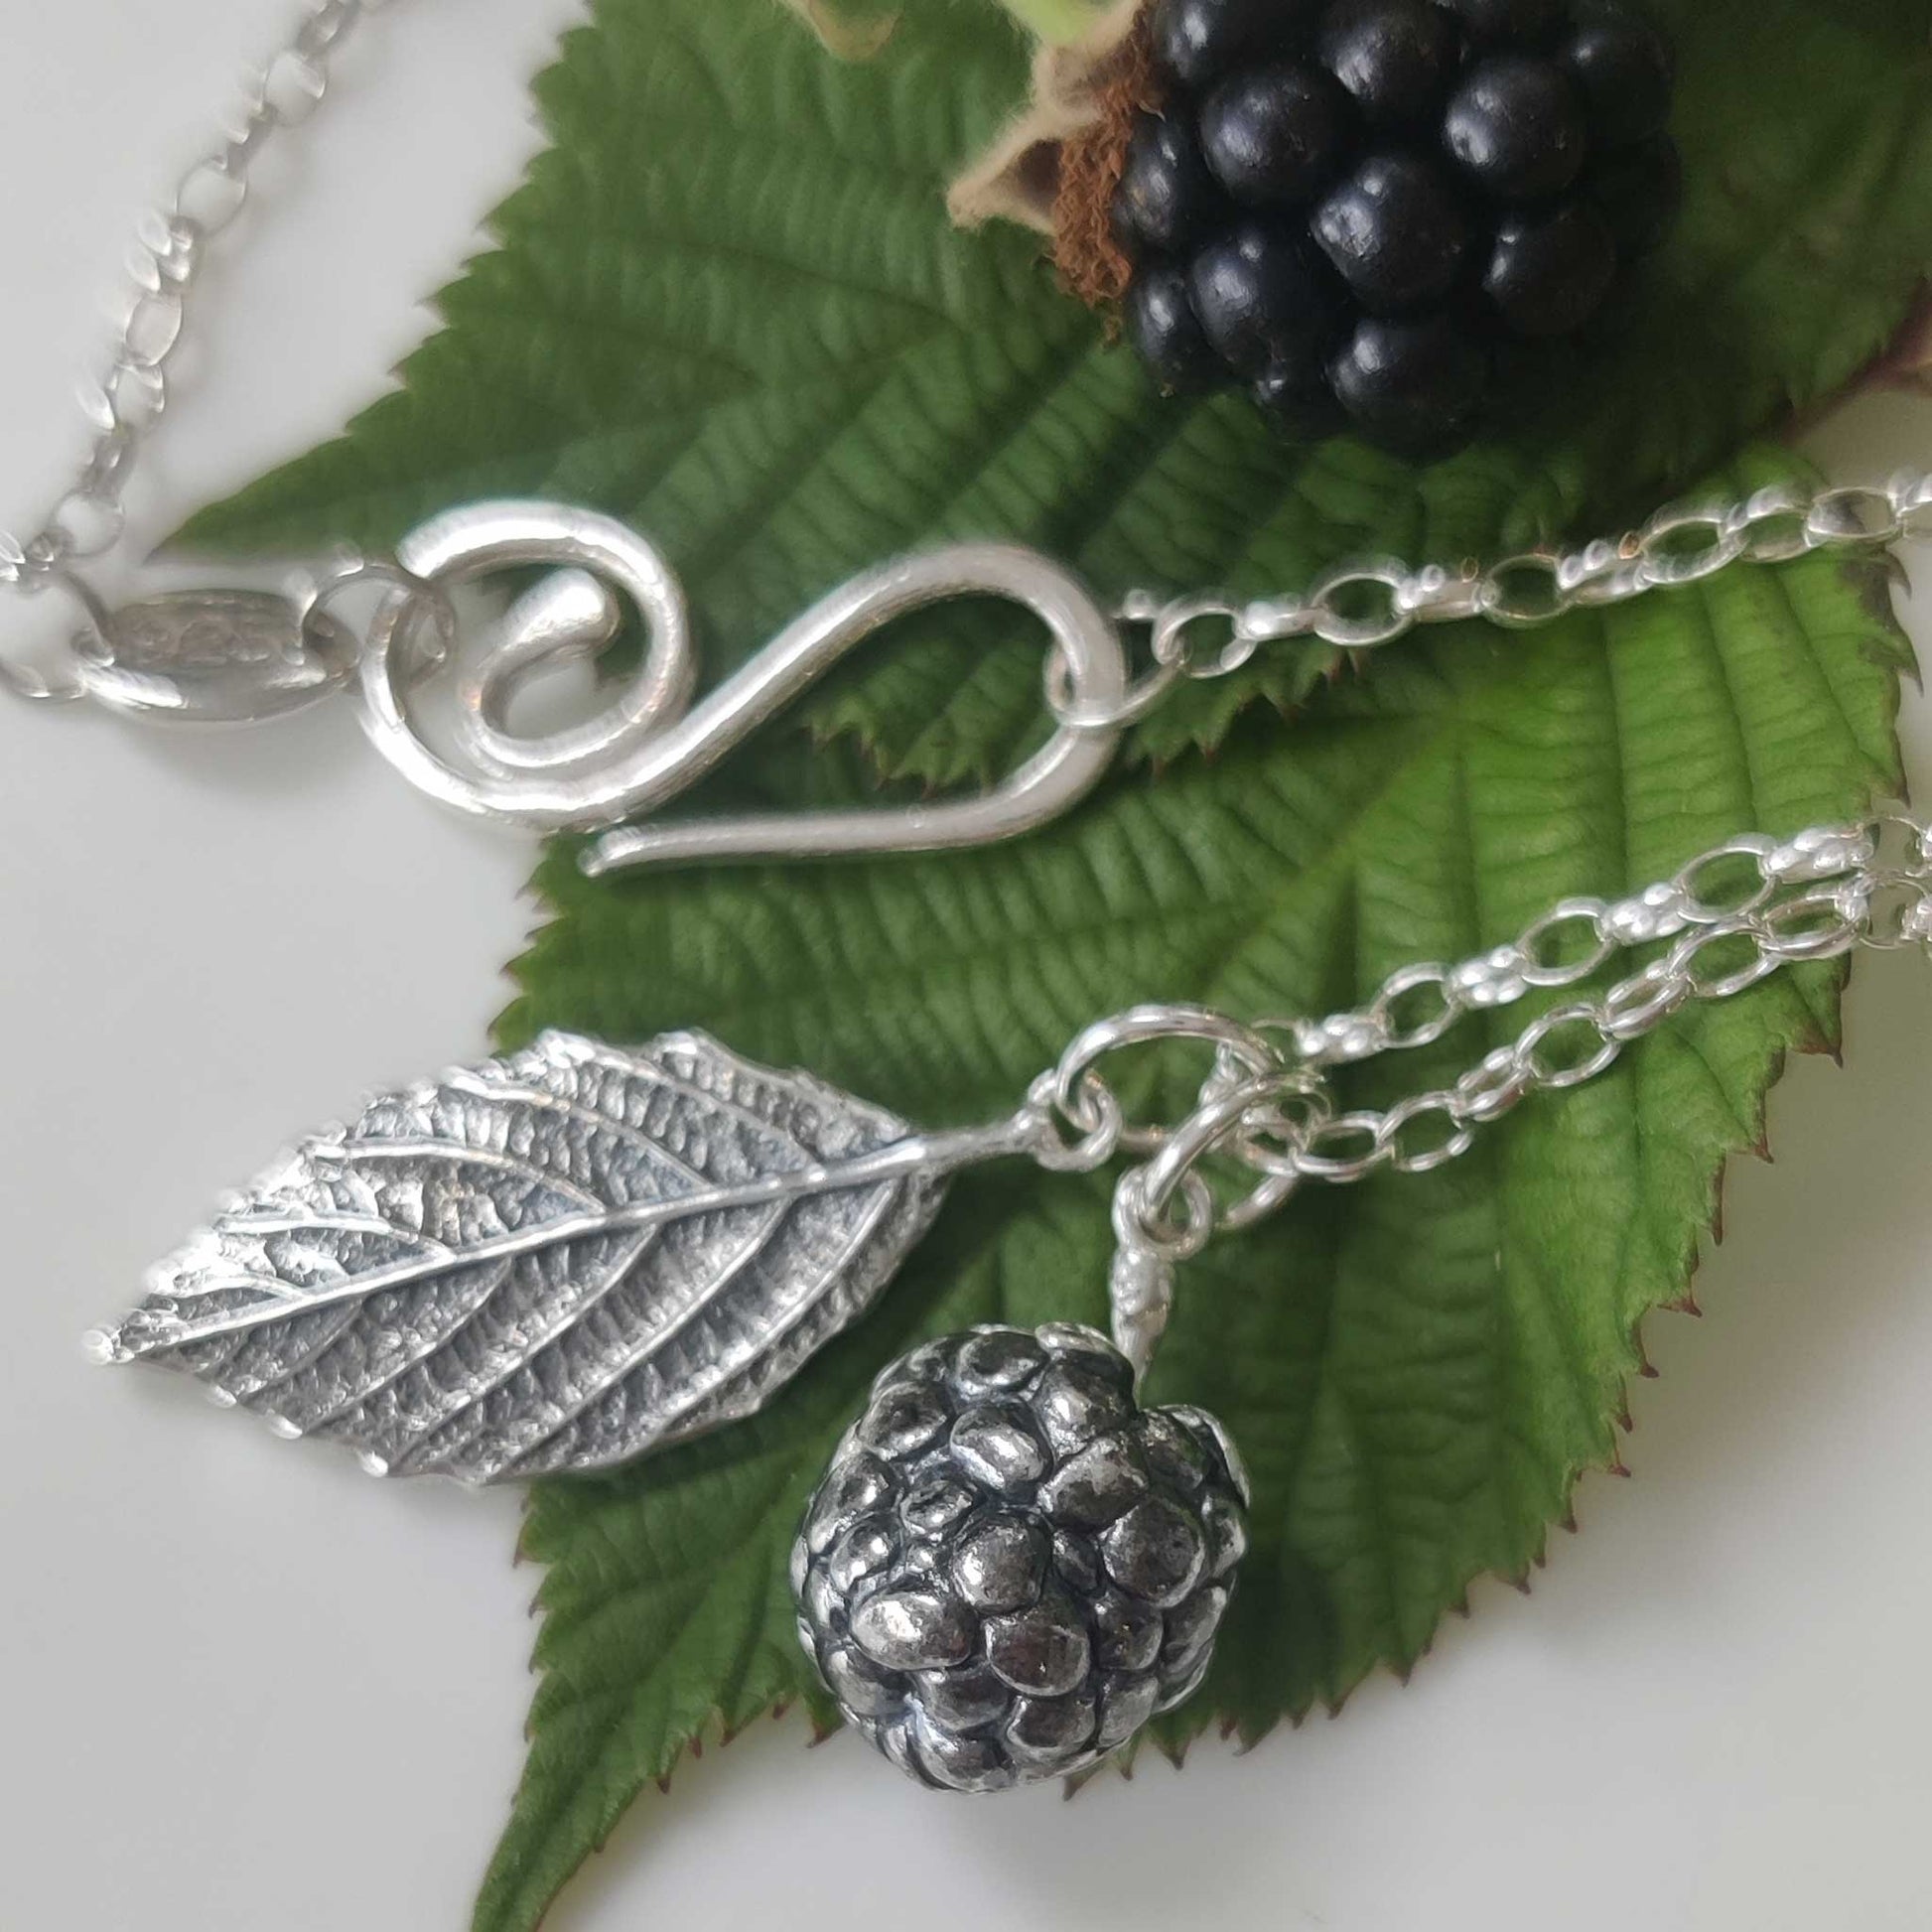 Blackberry and left necklace handcrafted in sterling silver. 